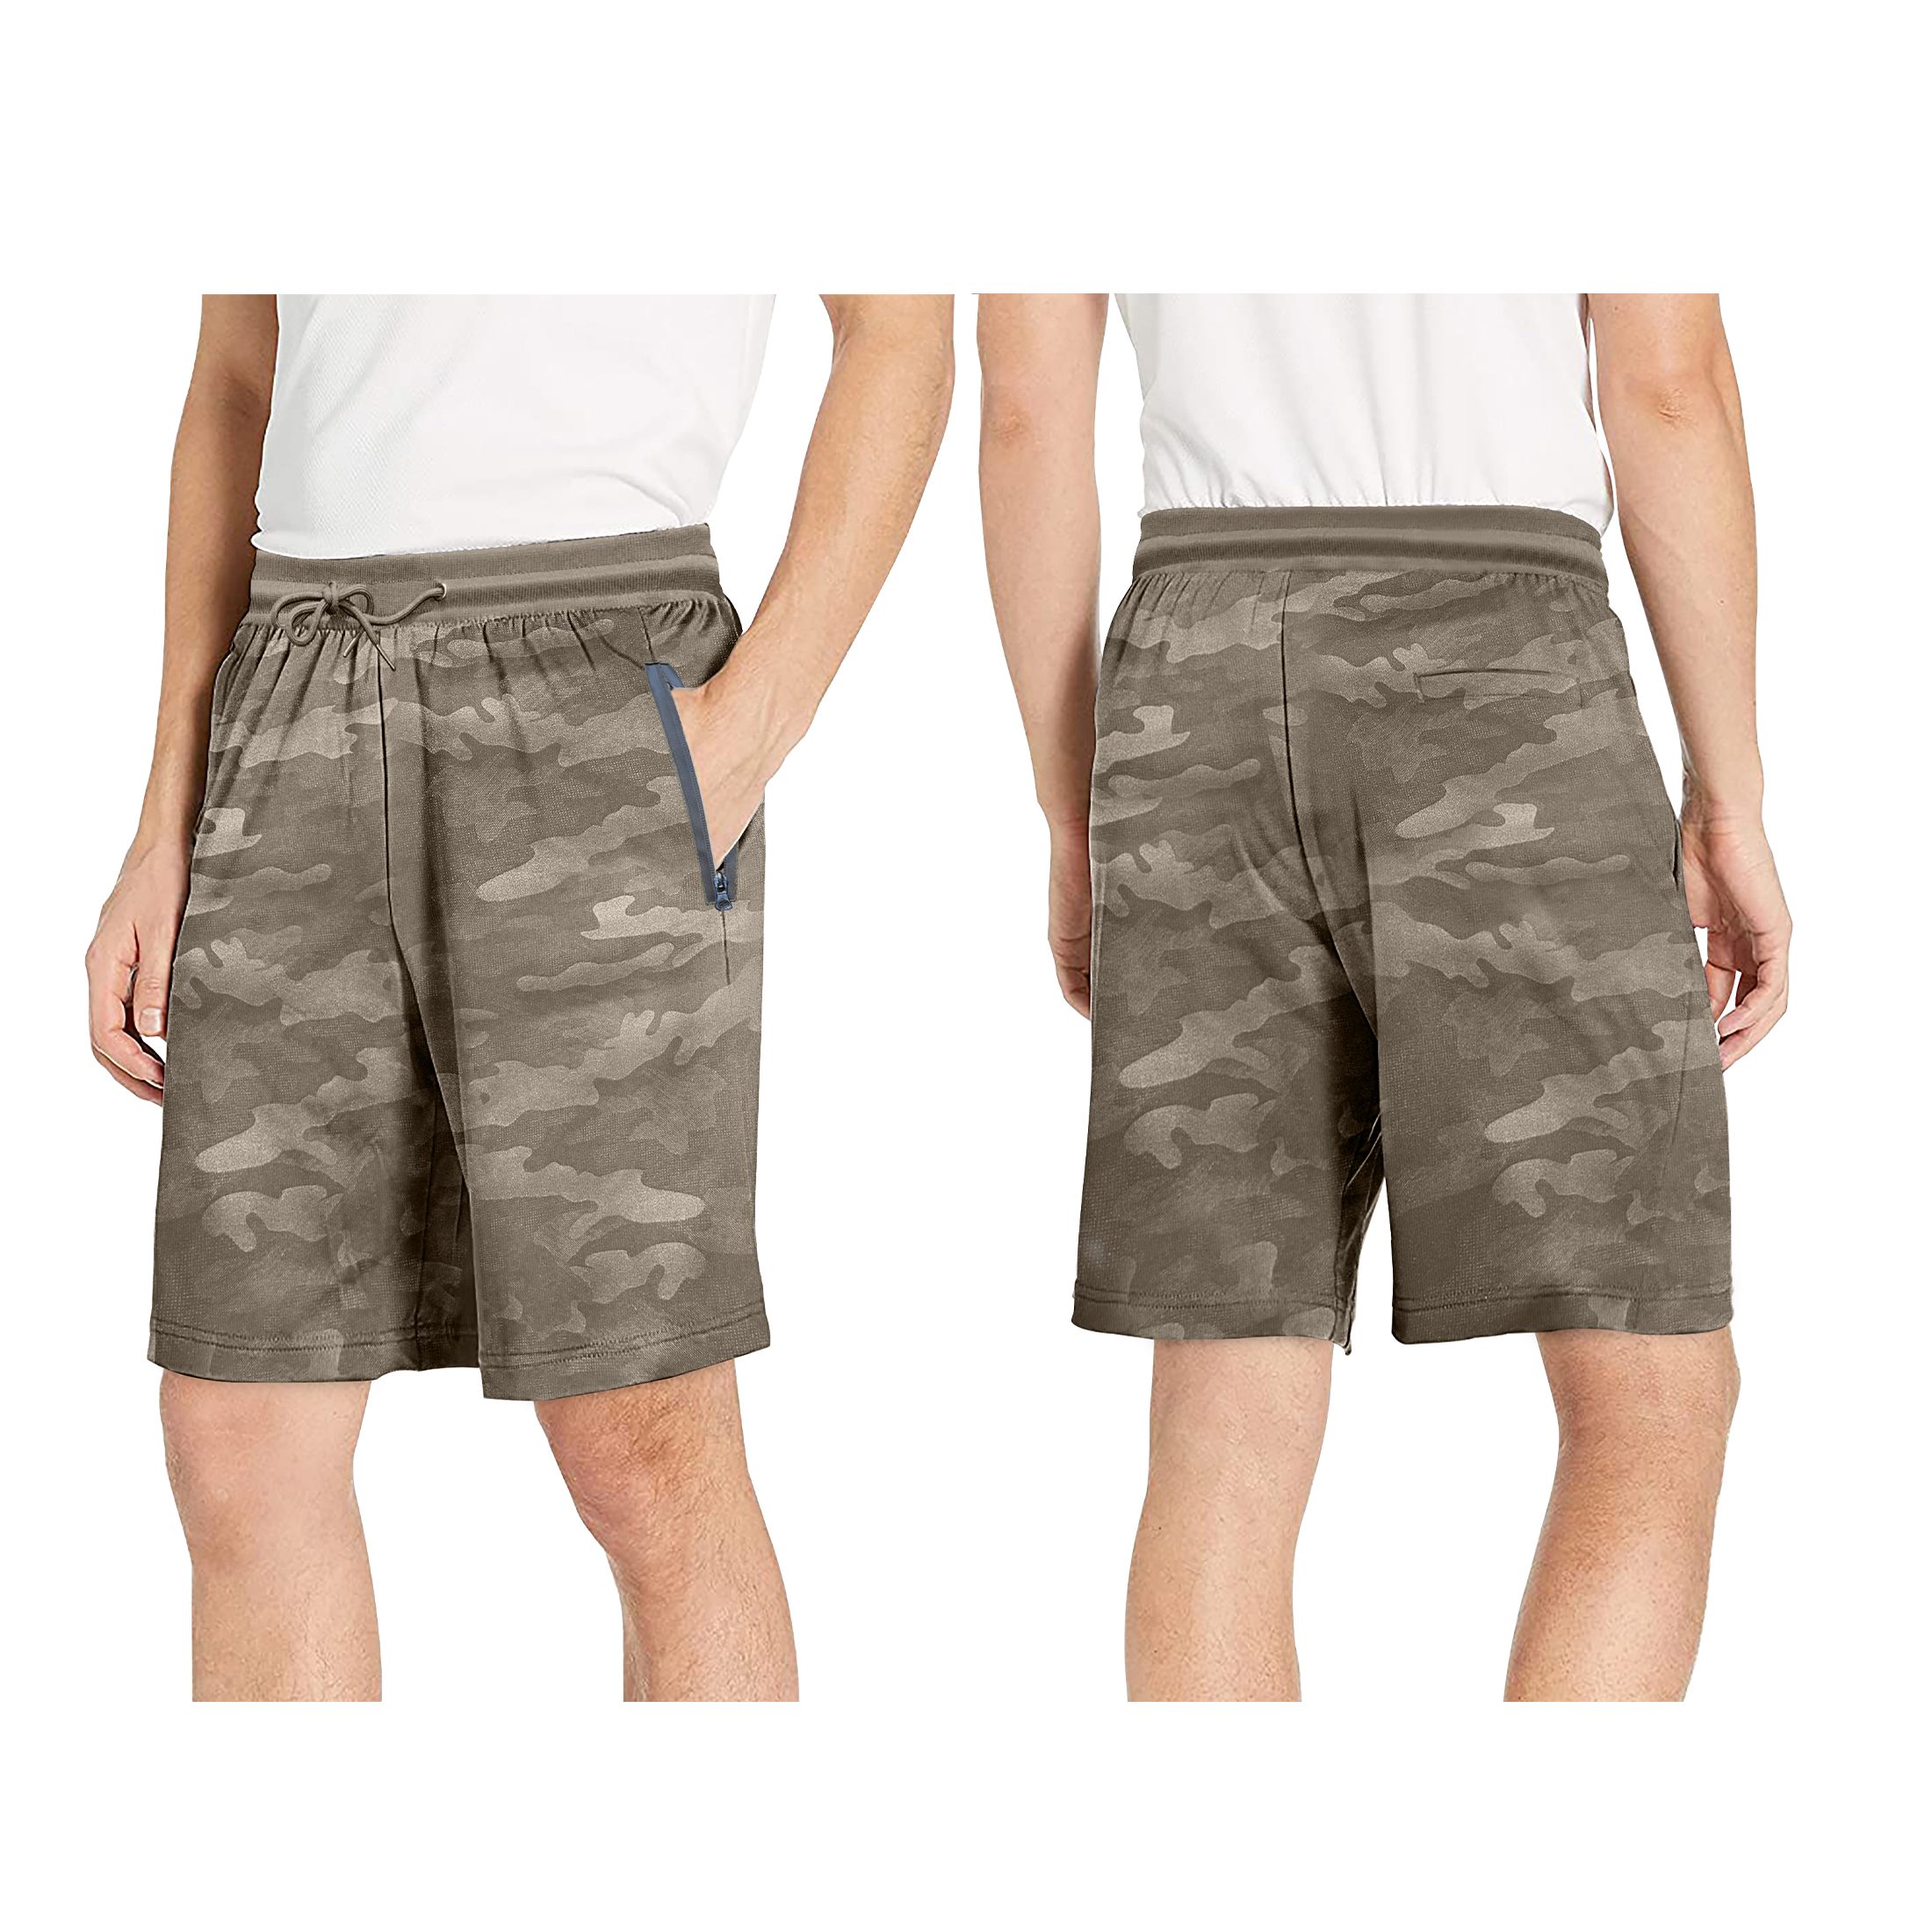 Men's Quick Dry Camo-Print Athletic Performance Active Running Scuba Shorts - Olive, X-Large